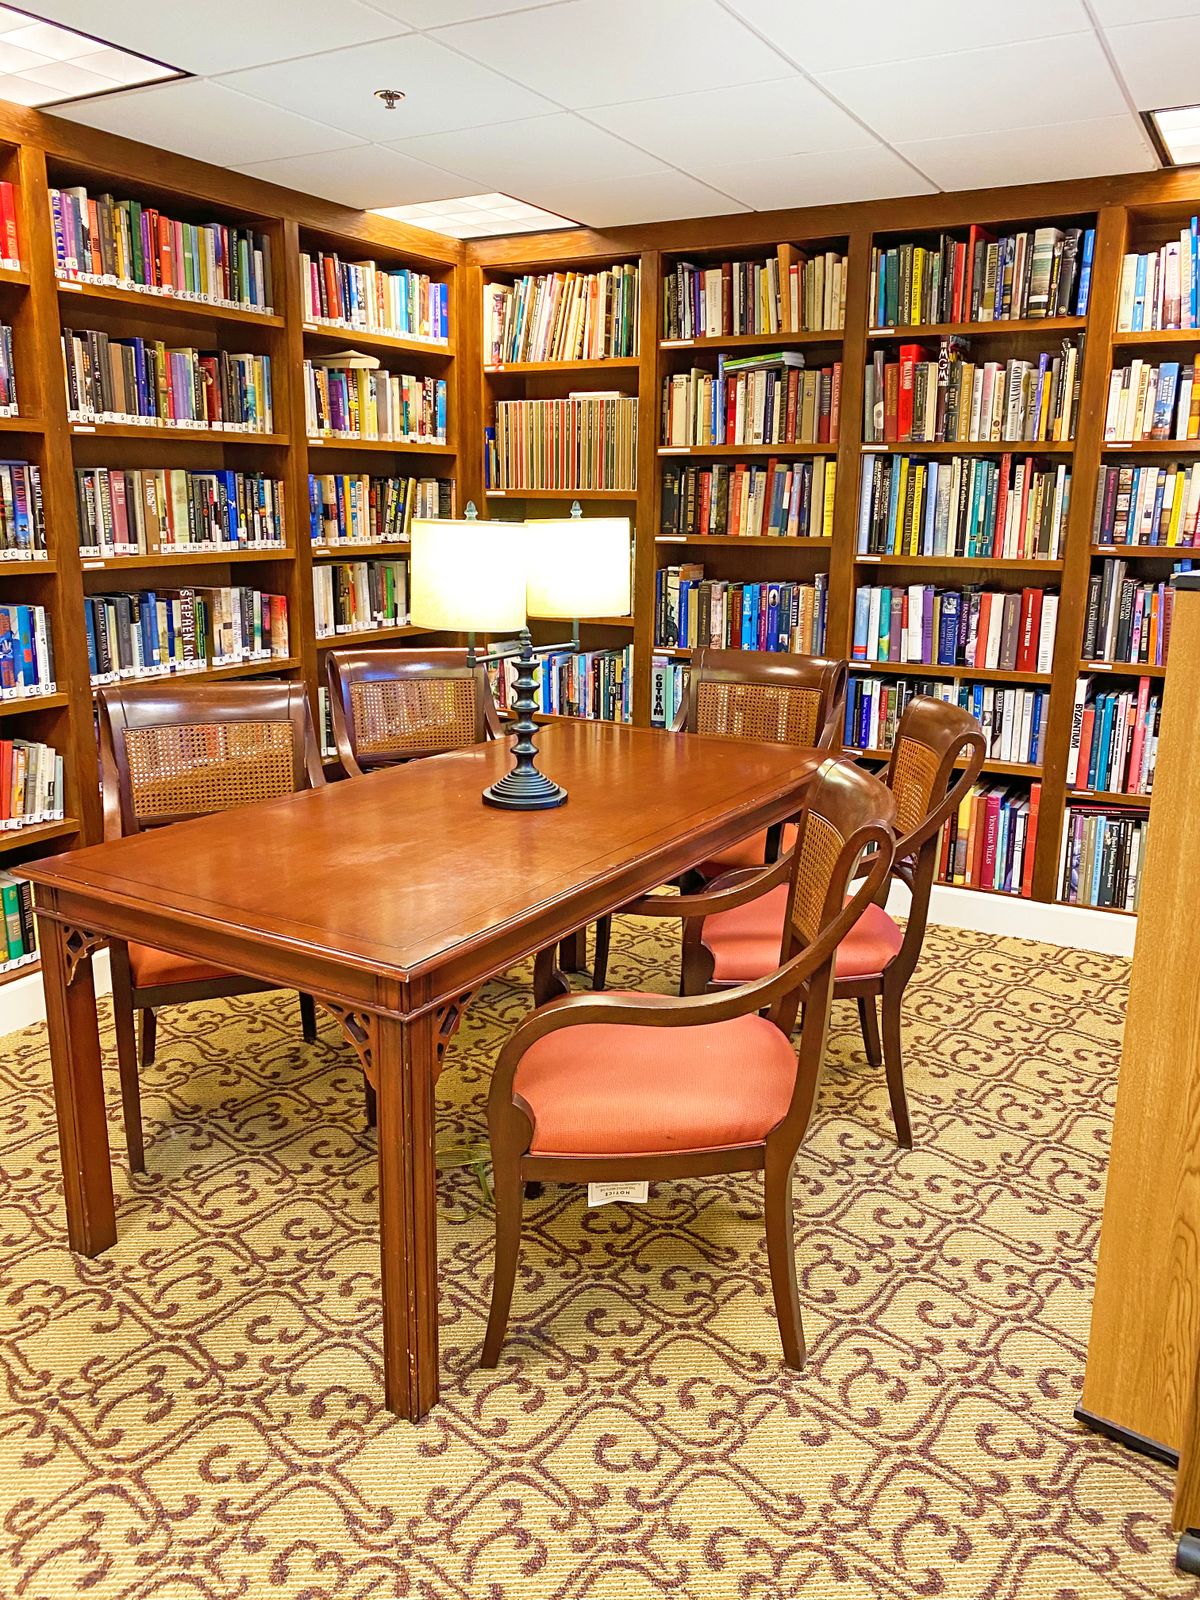 Senior residents enjoying a well-lit library with bookcases, tables, chairs, and desks at AlmaVia of San Francisco.